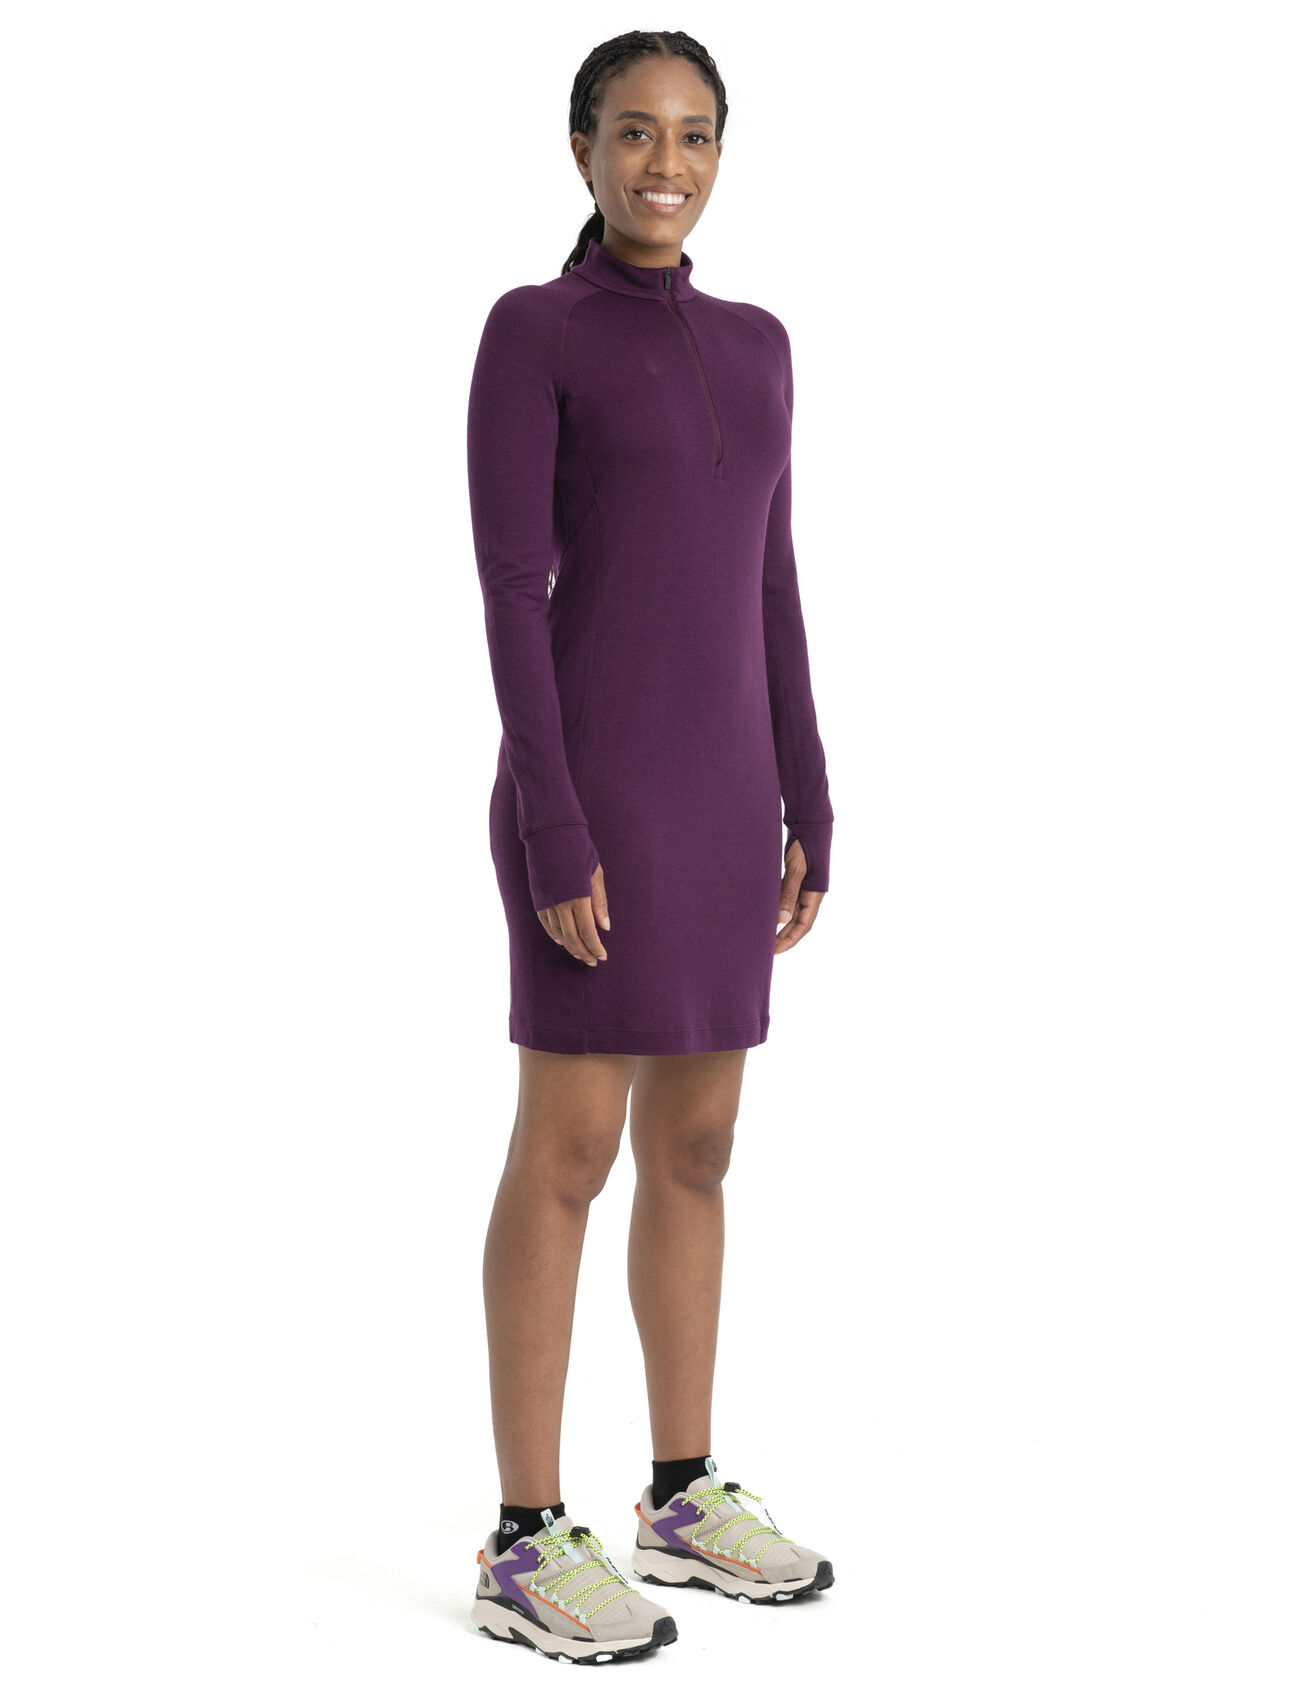 Womens Merino 260 Granary Long Sleeve Half Zip Dress A stylish, super comfortable fusion of our half zip base layer and a classic dress made with 100% merino wool, the 260 Granary Long Sleeve Half Zip Dress embodies all-natural style.